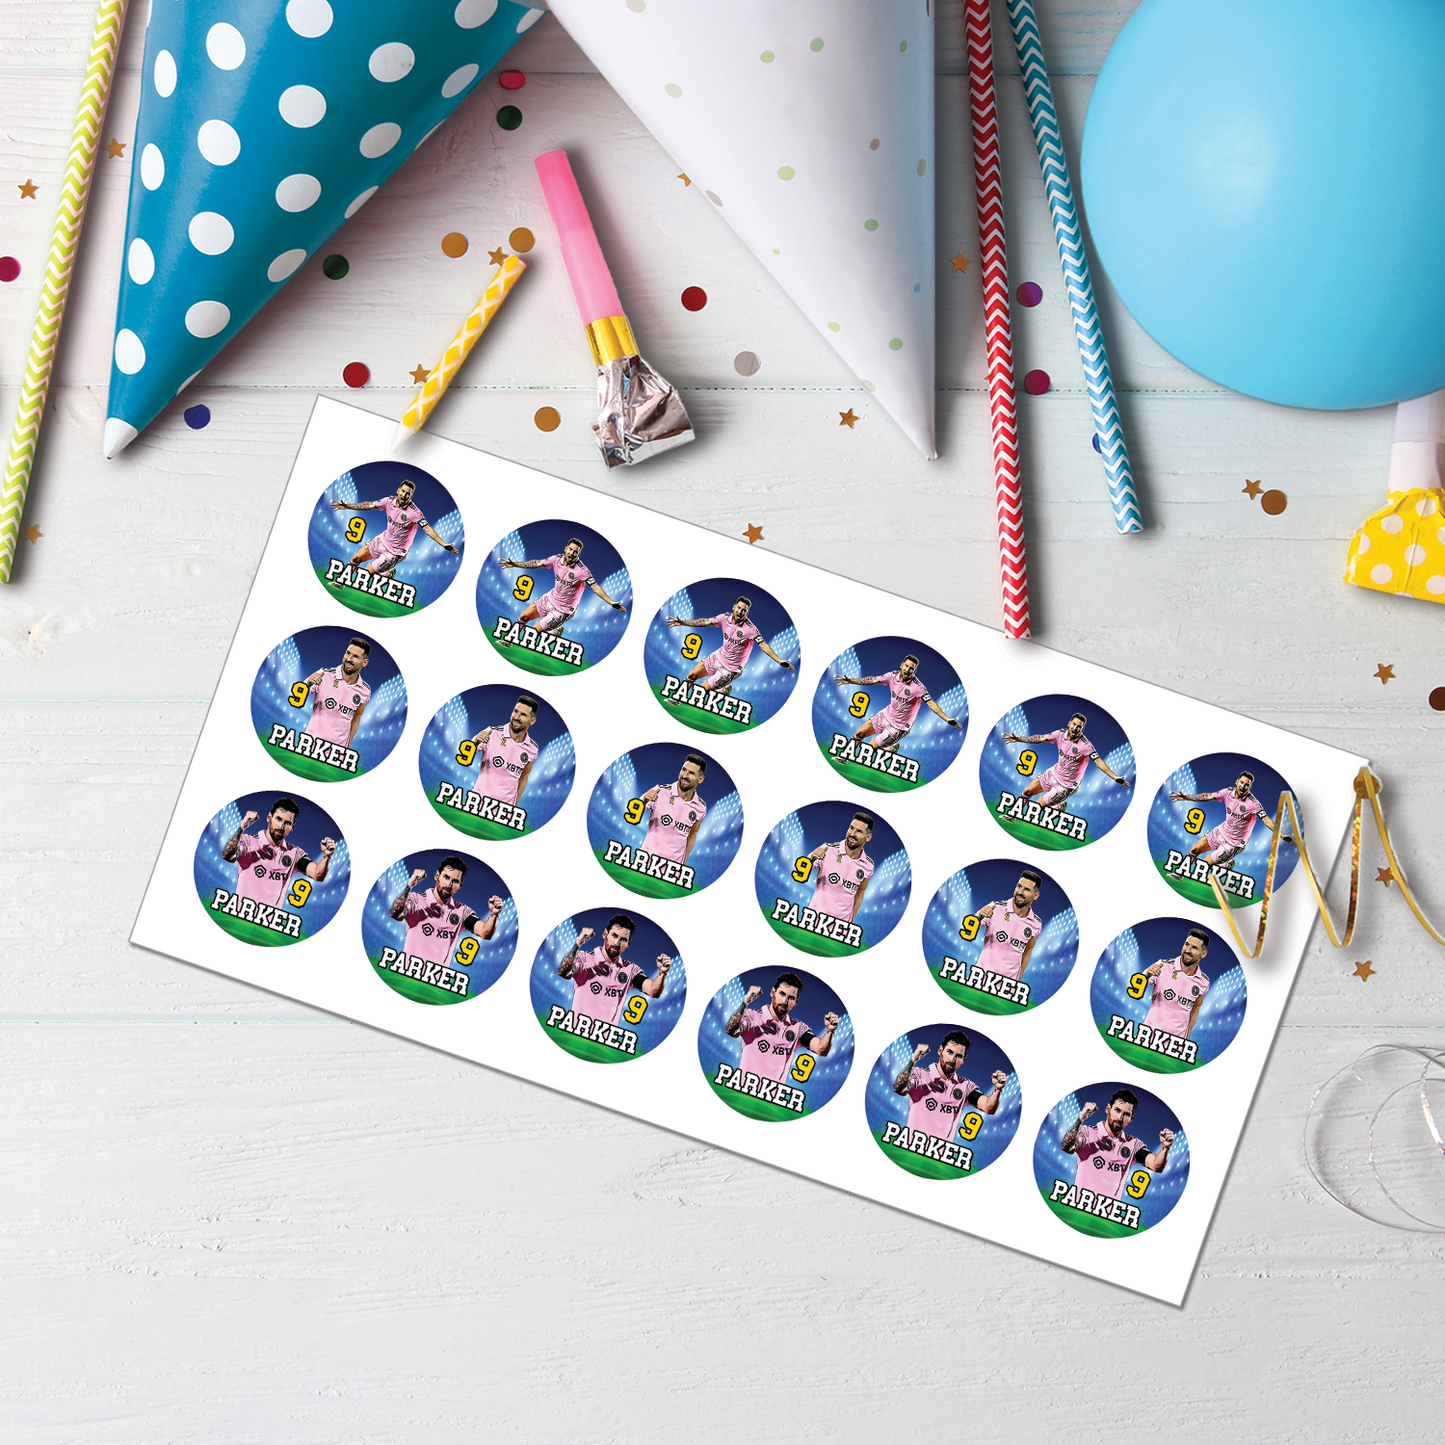 Lionel Messi Personalized Cupcakes Toppers - A Sweet Addition to Your Party